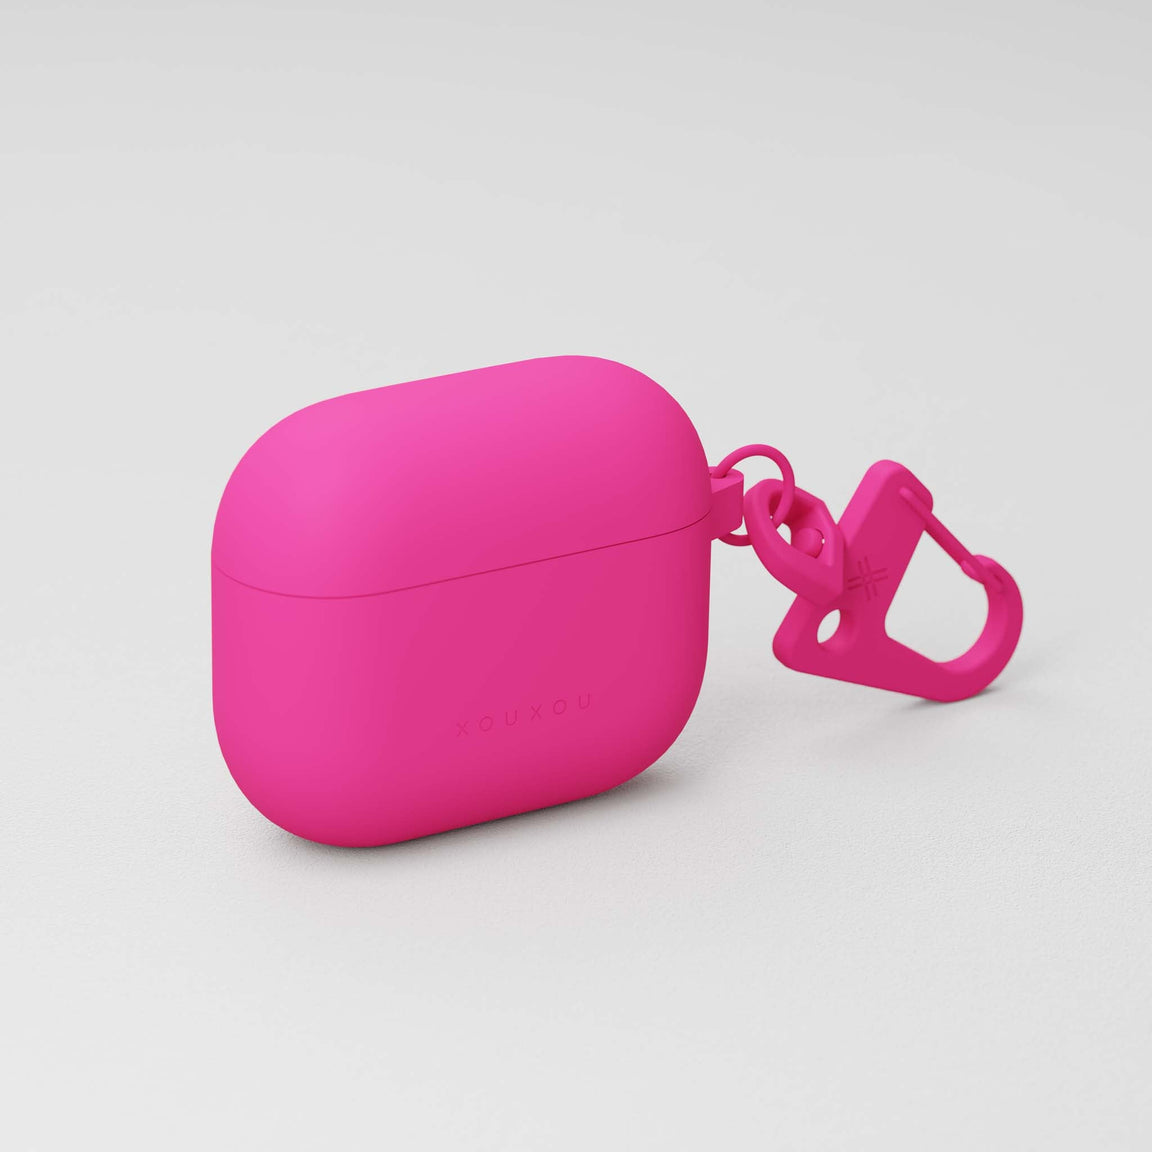 Apple AirPods 3rd generation case in Pink with soft-touch finish and carabiner | XOUXOU